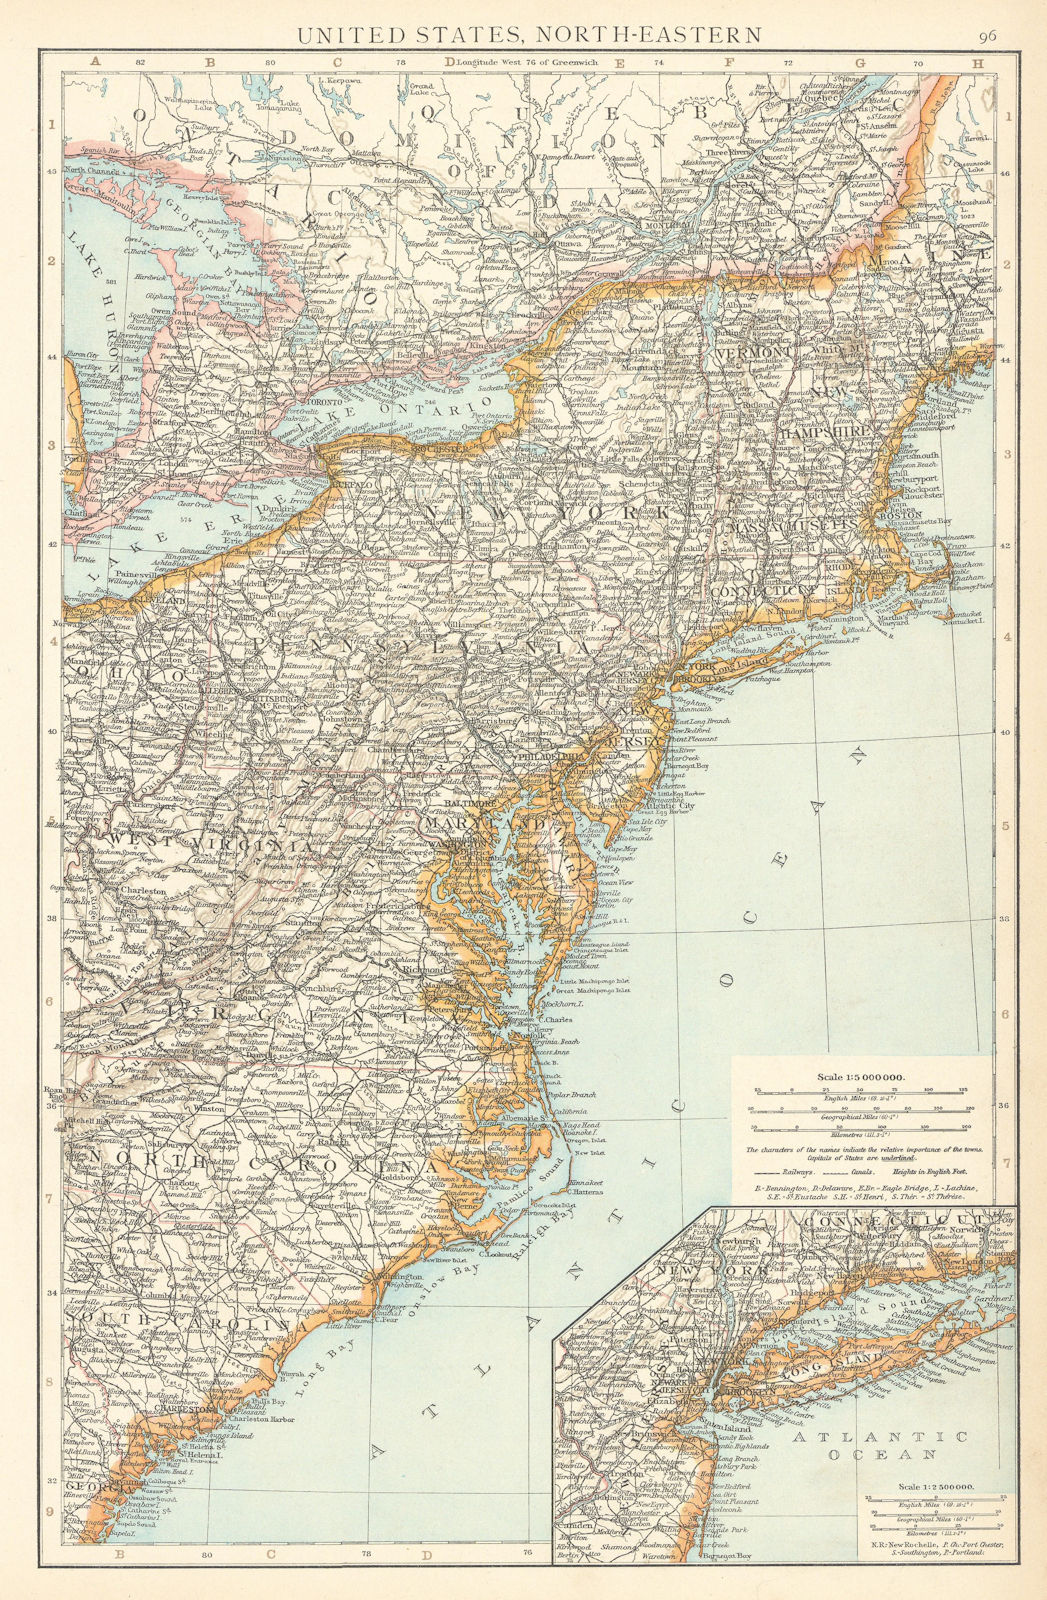 Associate Product North-east United States. New England Atlantic Seaboard. TIMES 1895 old map